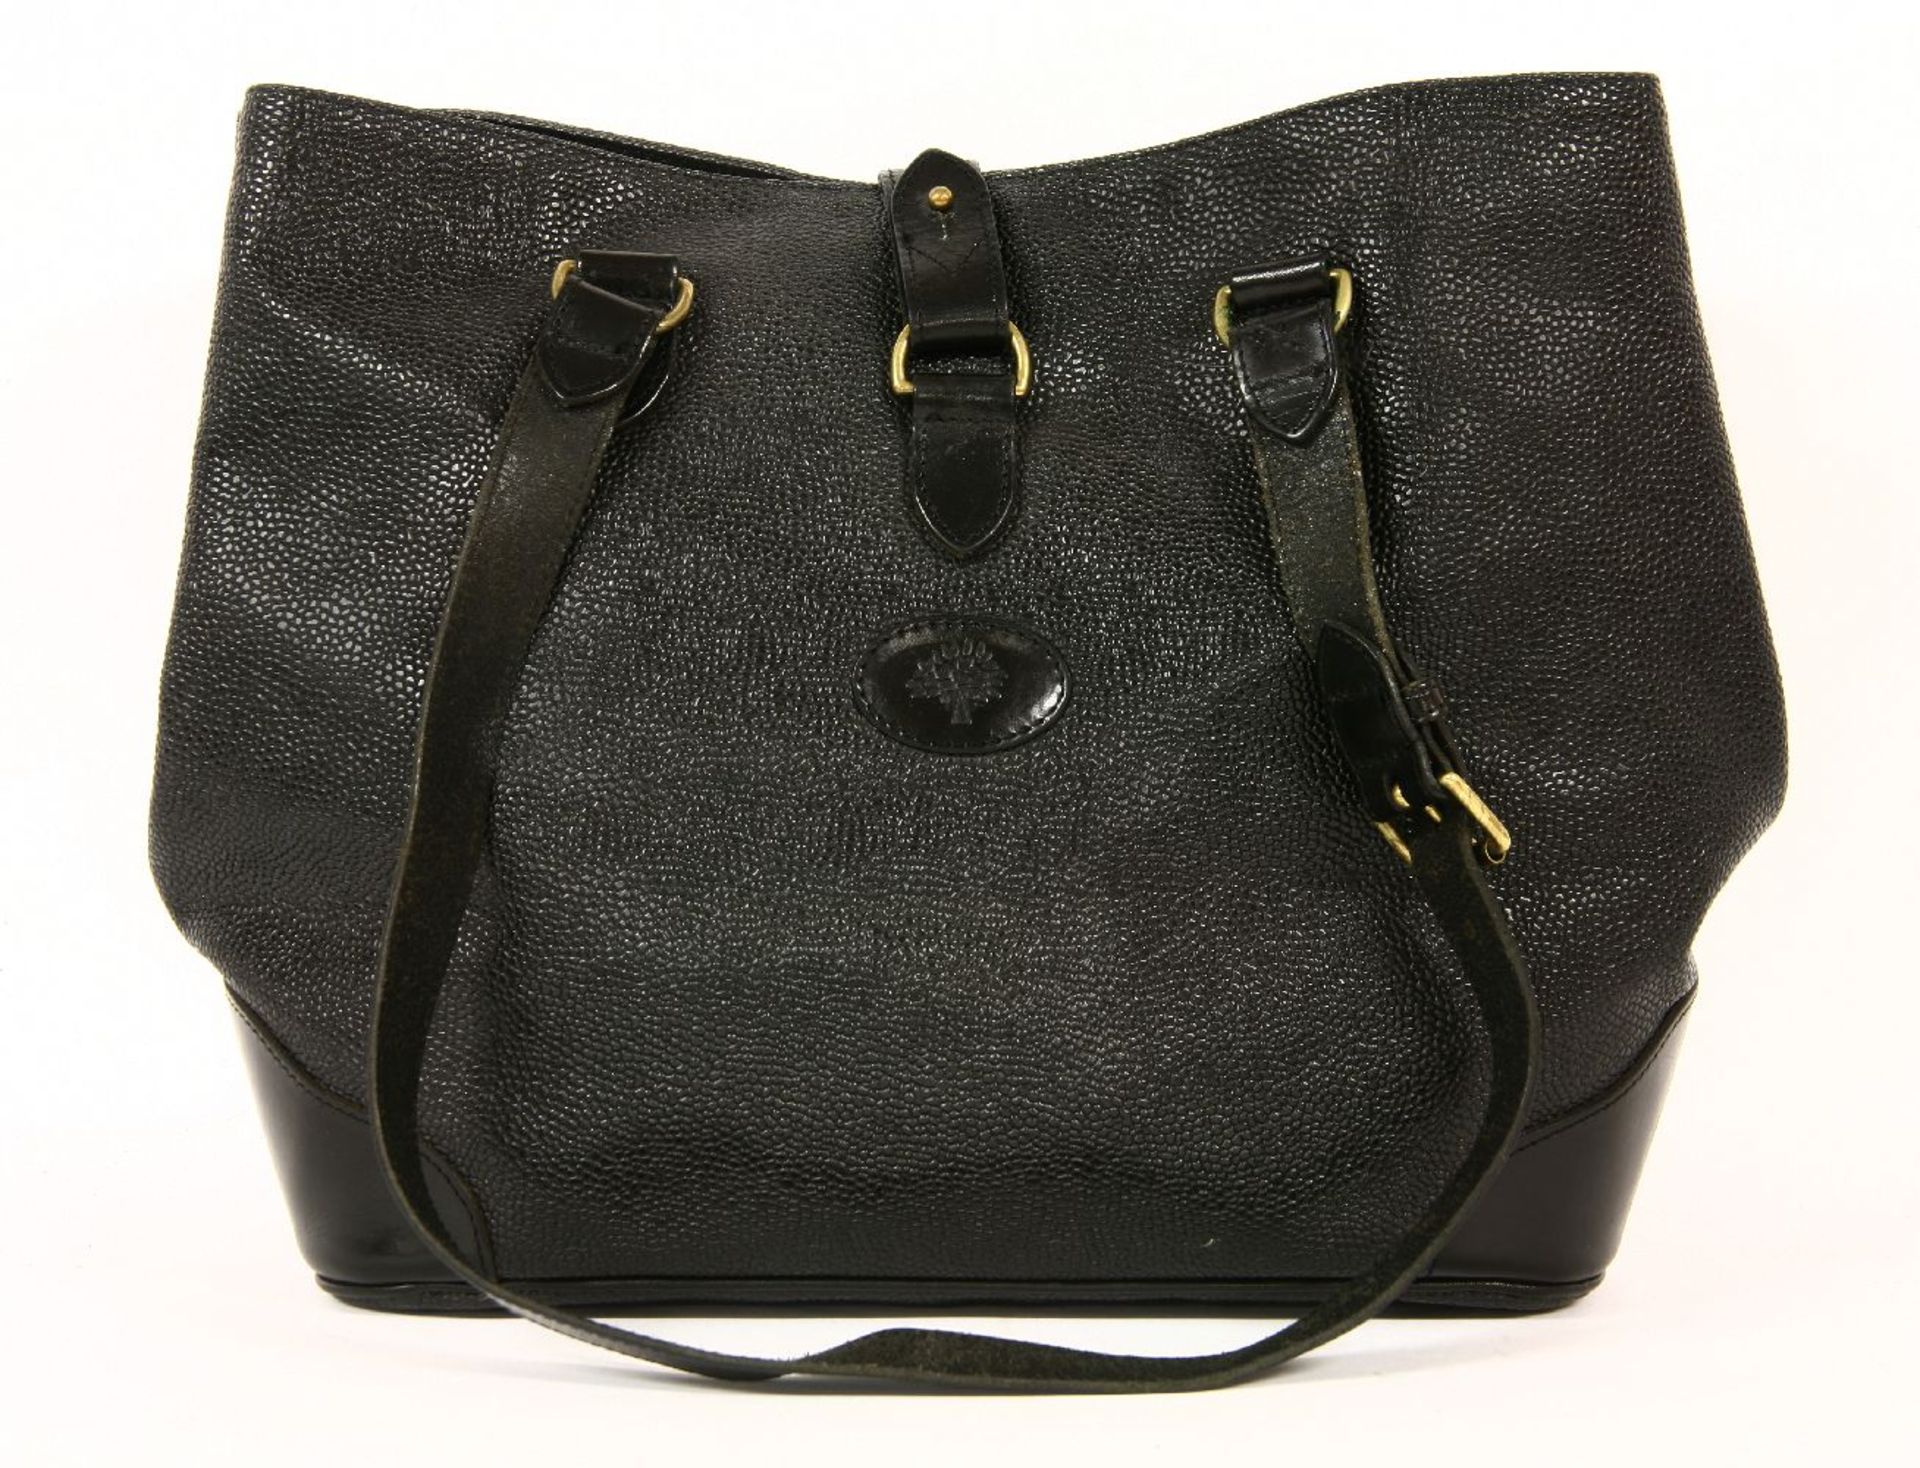 A Mulberry black pebbled leather shopper tote handbag,with smooth leather detailing and flat strap